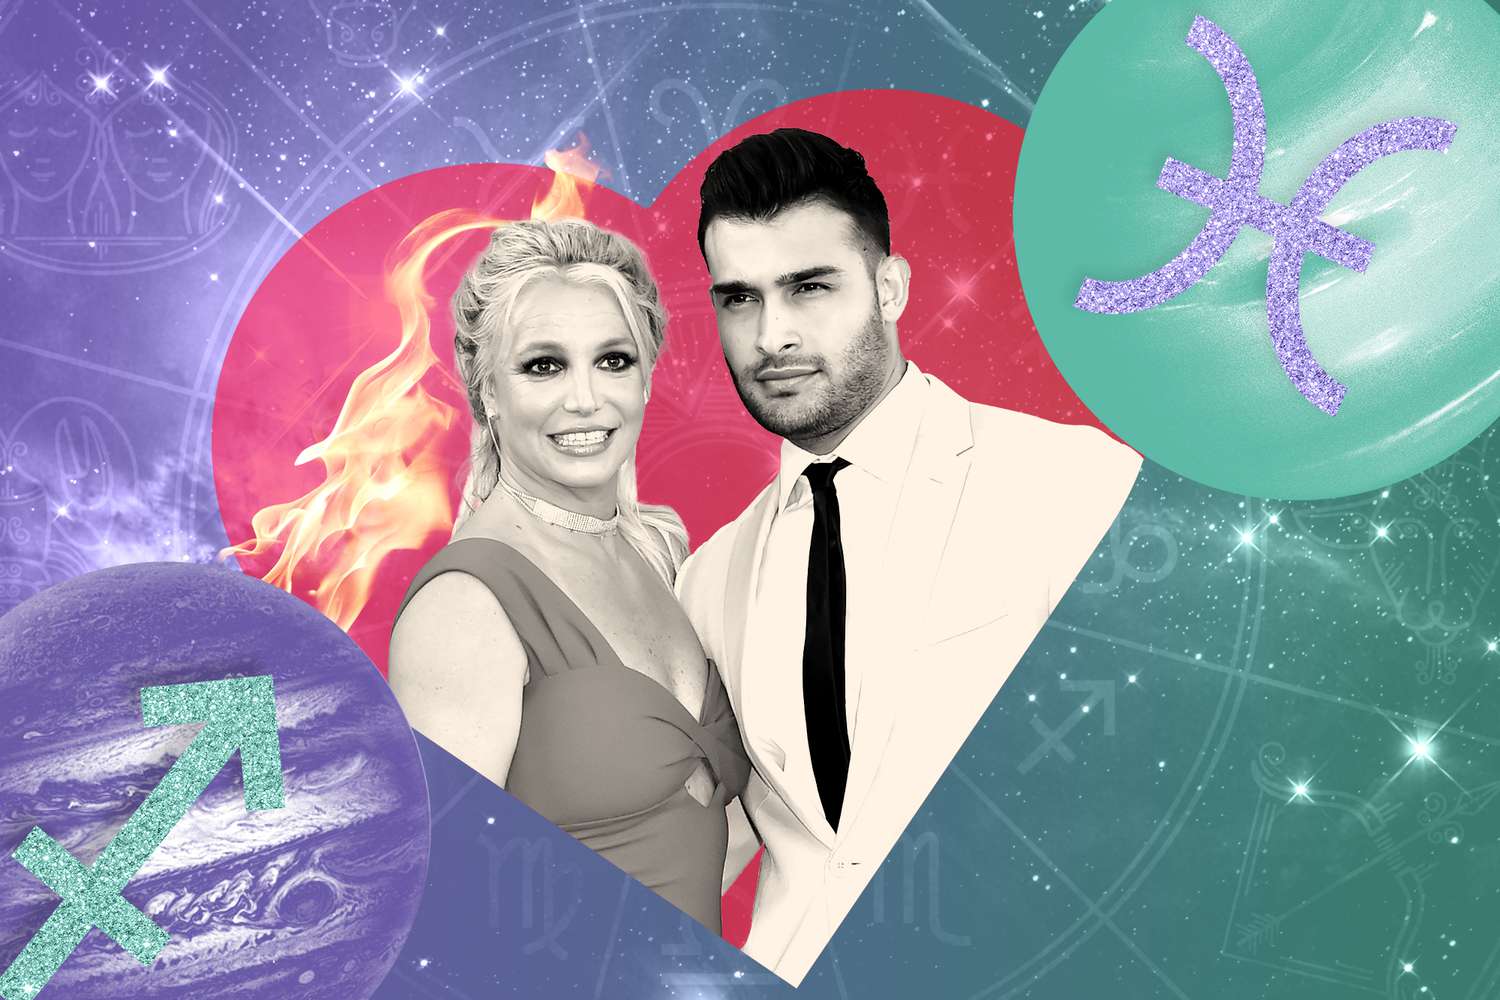 Britney Spears and Sam Asghari inside a heart surrounded by stars planets and zodiac signs